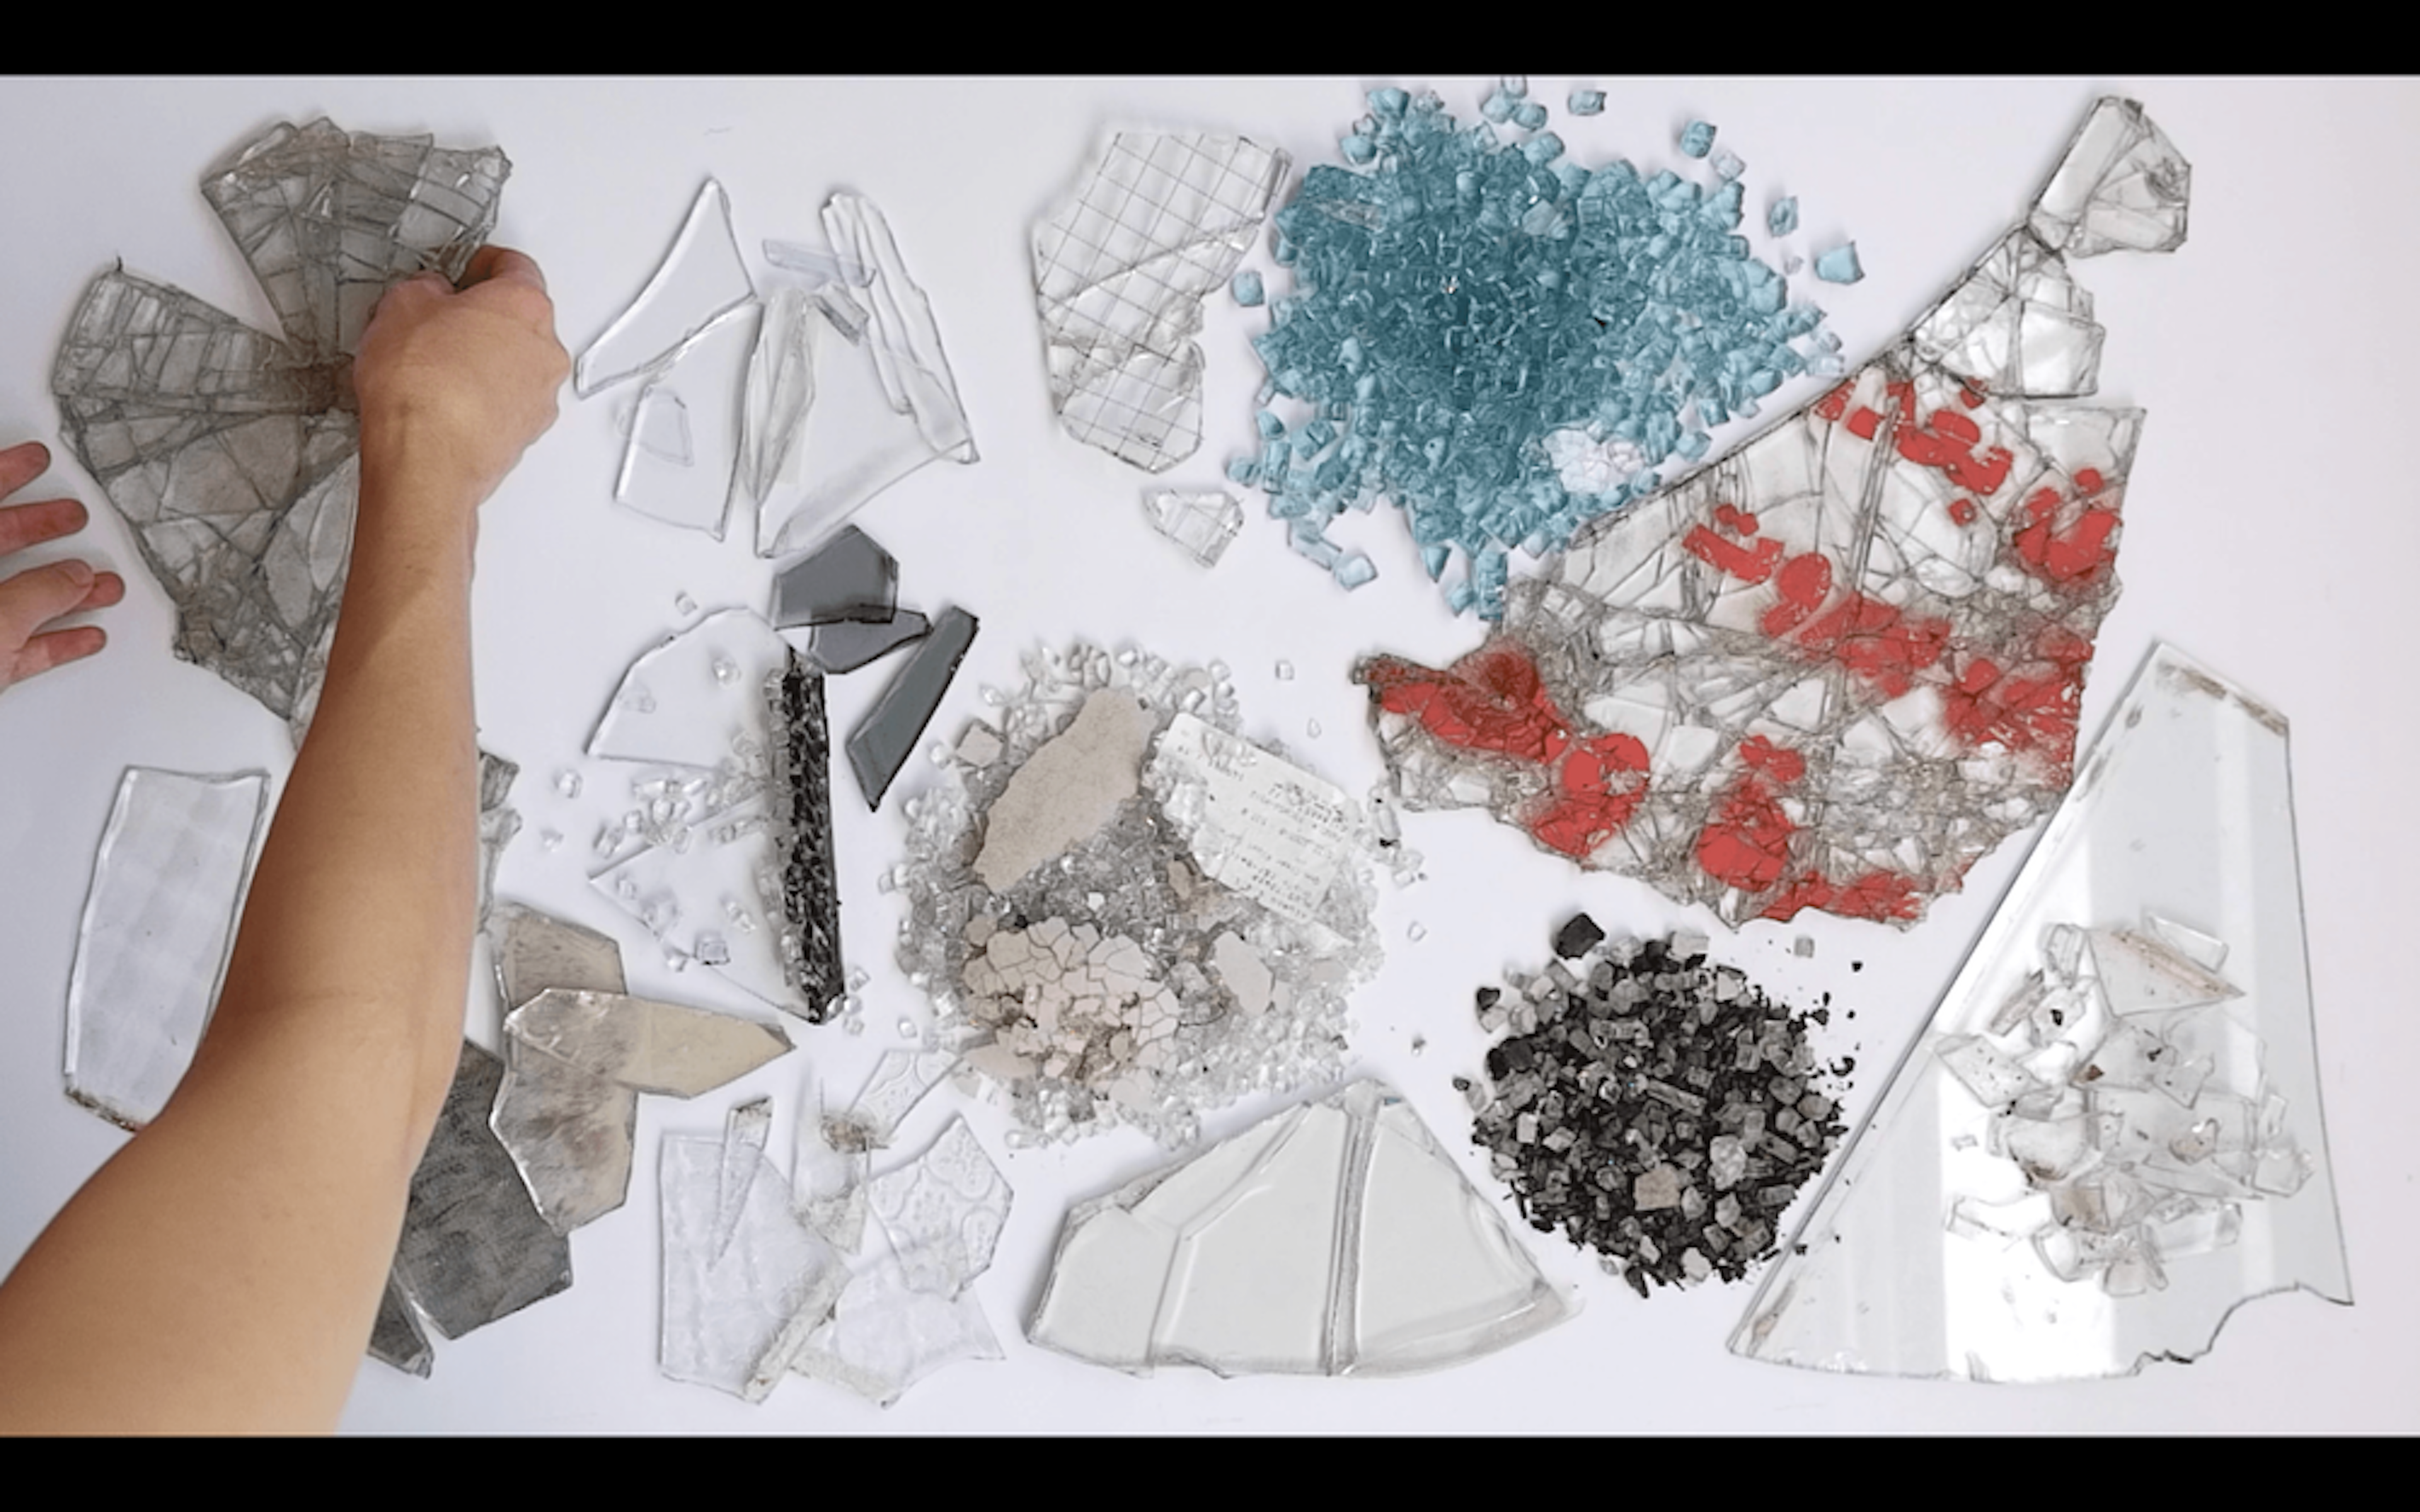 Overhead view of various pieces of colorful broken glass, assembled neatly. There is an arm on the left side arranging pieces of glass.